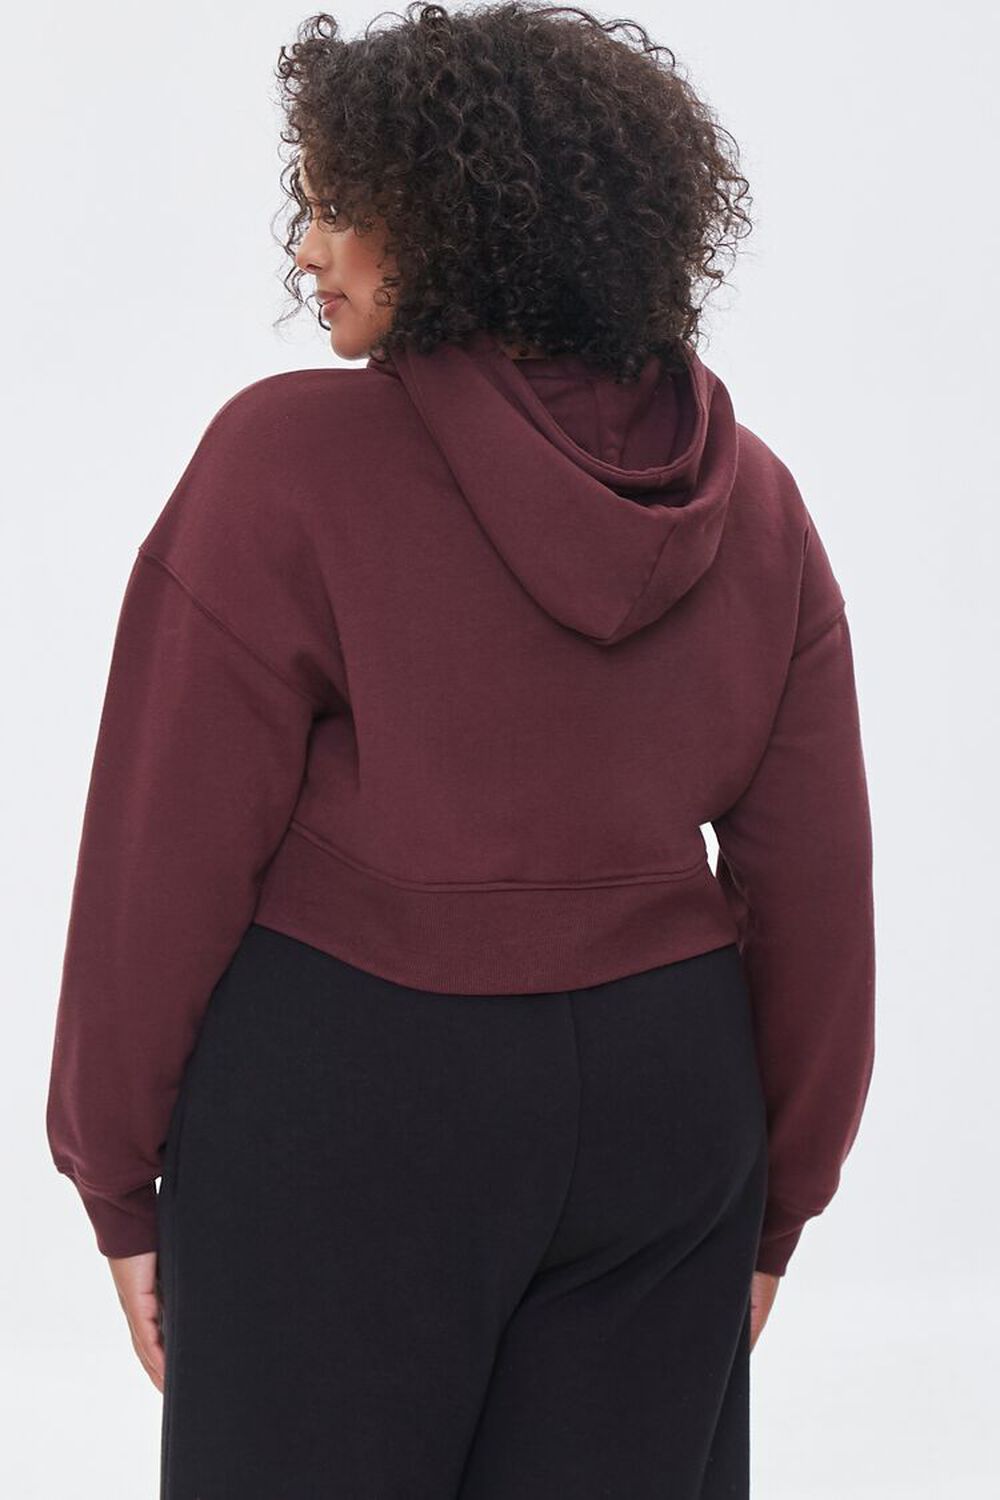 Plus Size Organically Grown Cotton Hoodie, image 3